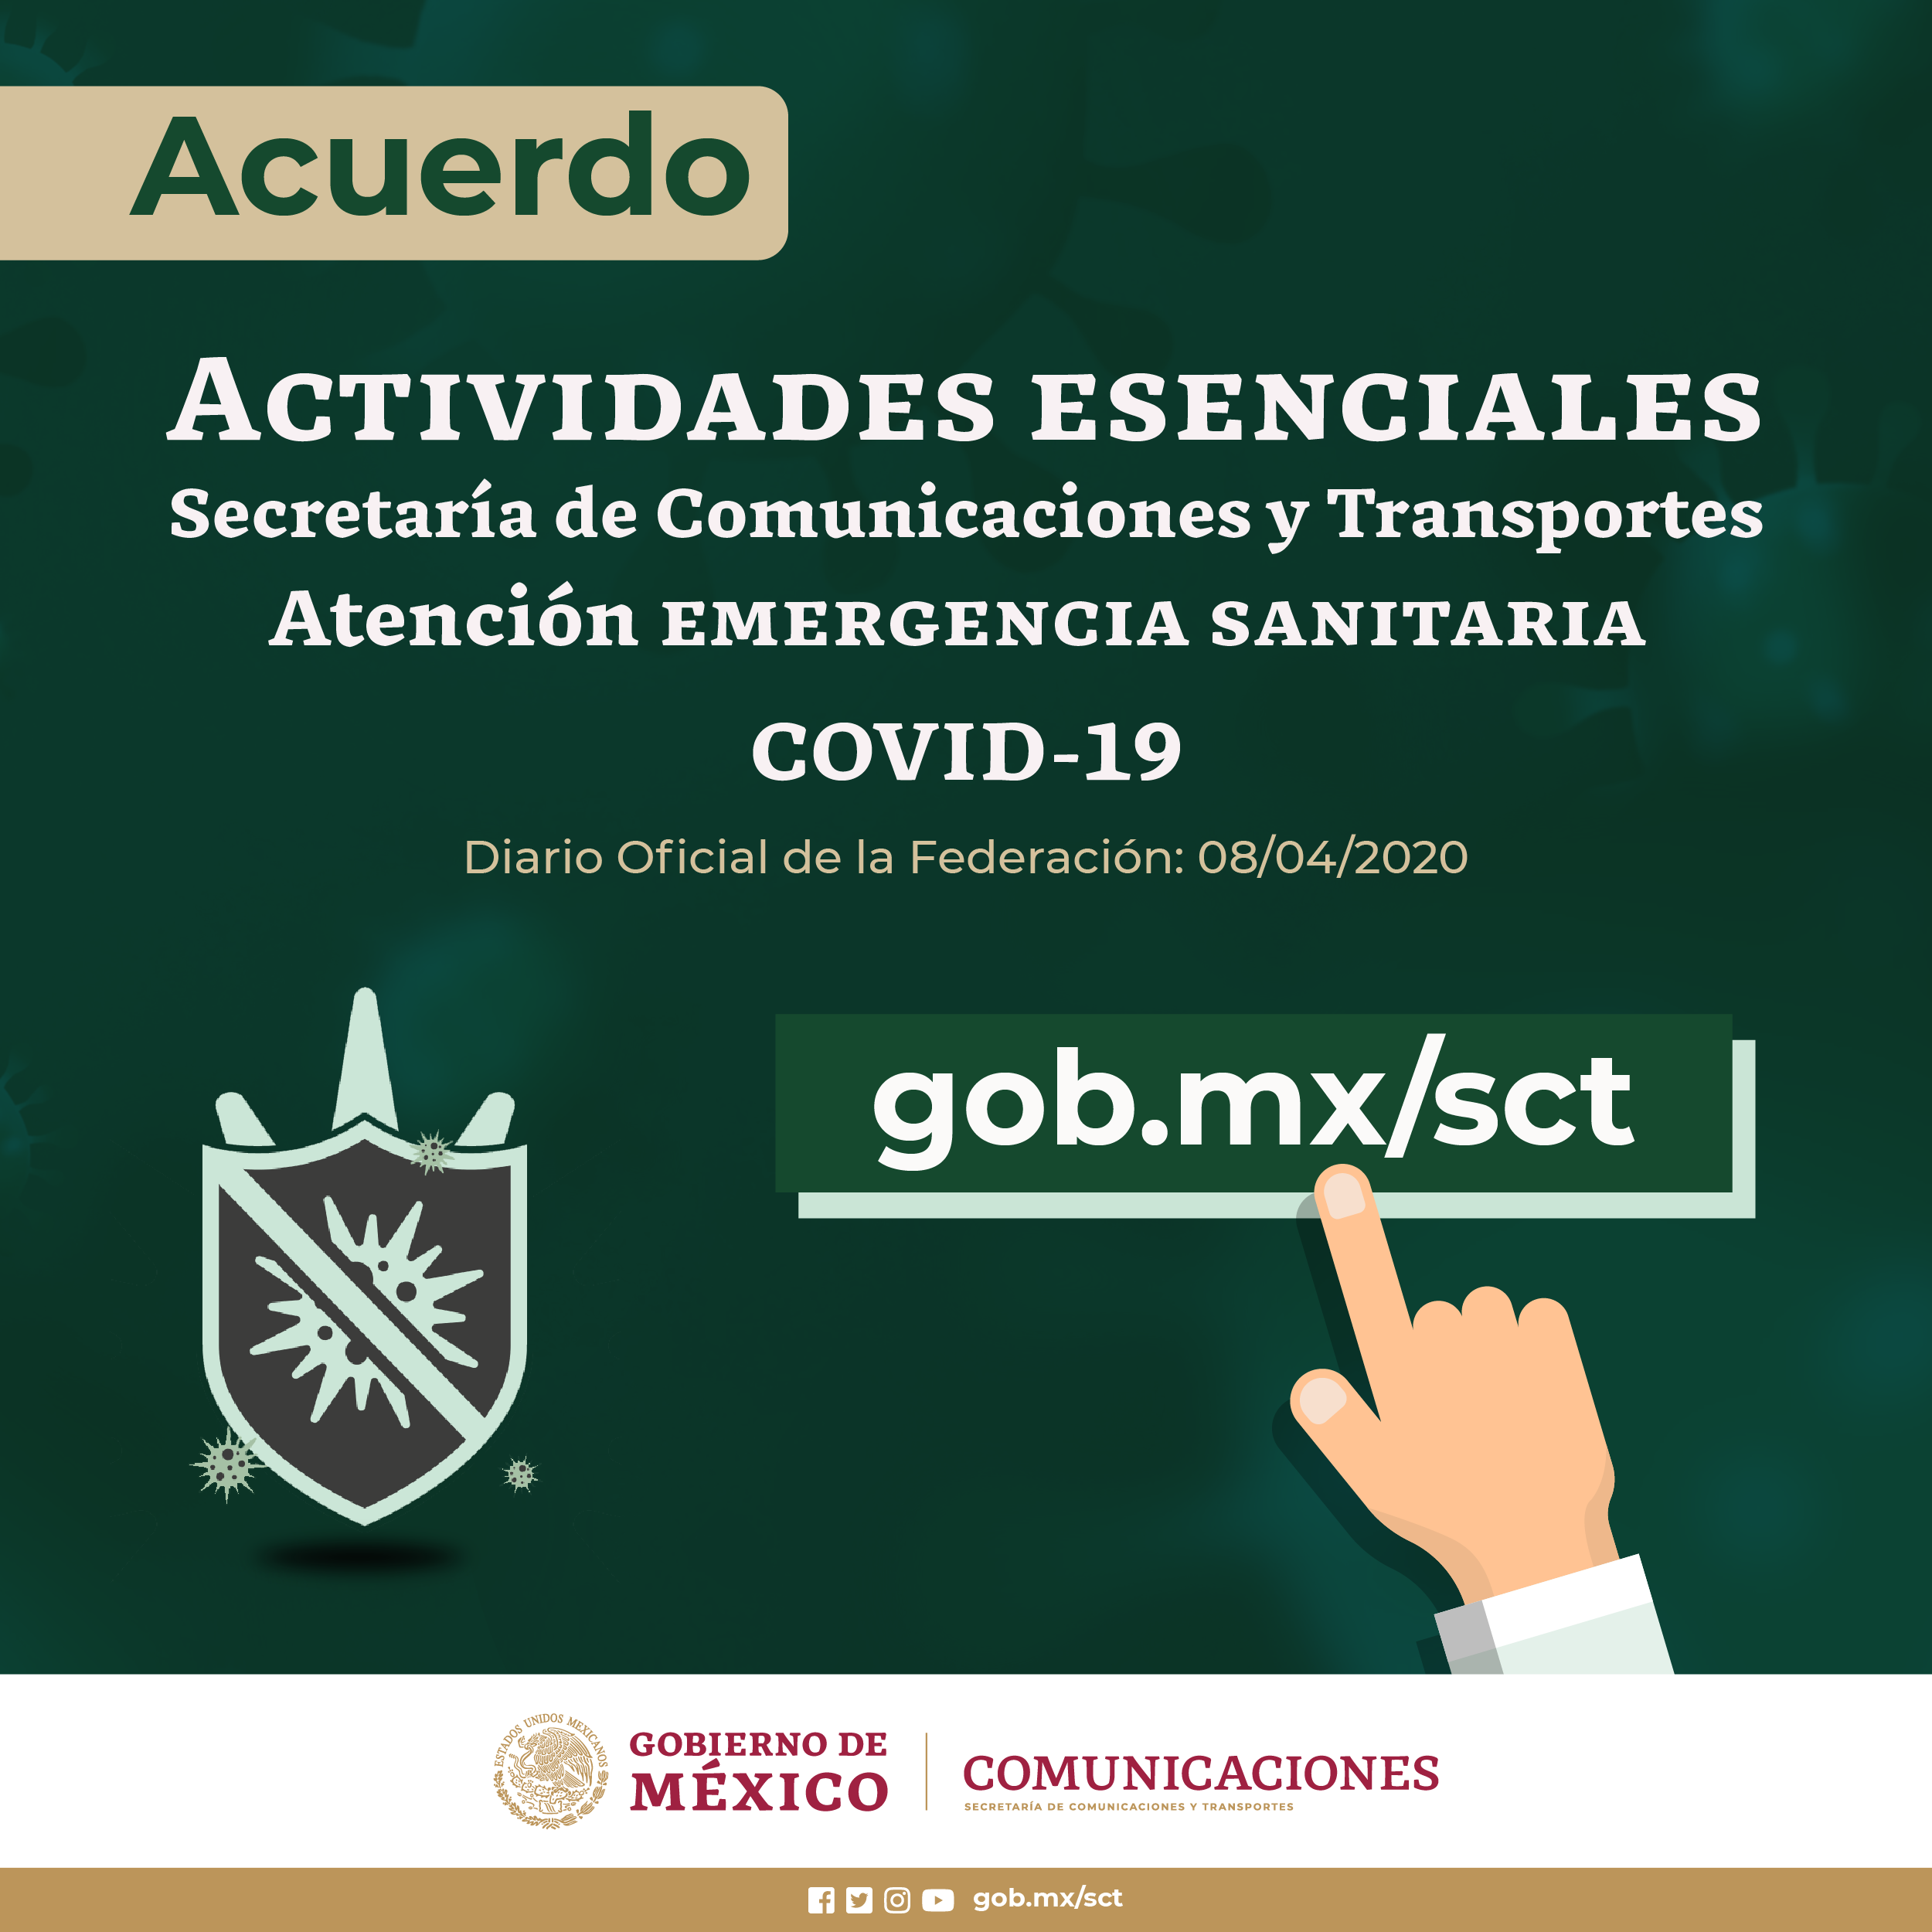 /cms/uploads/image/file/577115/Actividades_Esenciales_COVID19_SCT.png